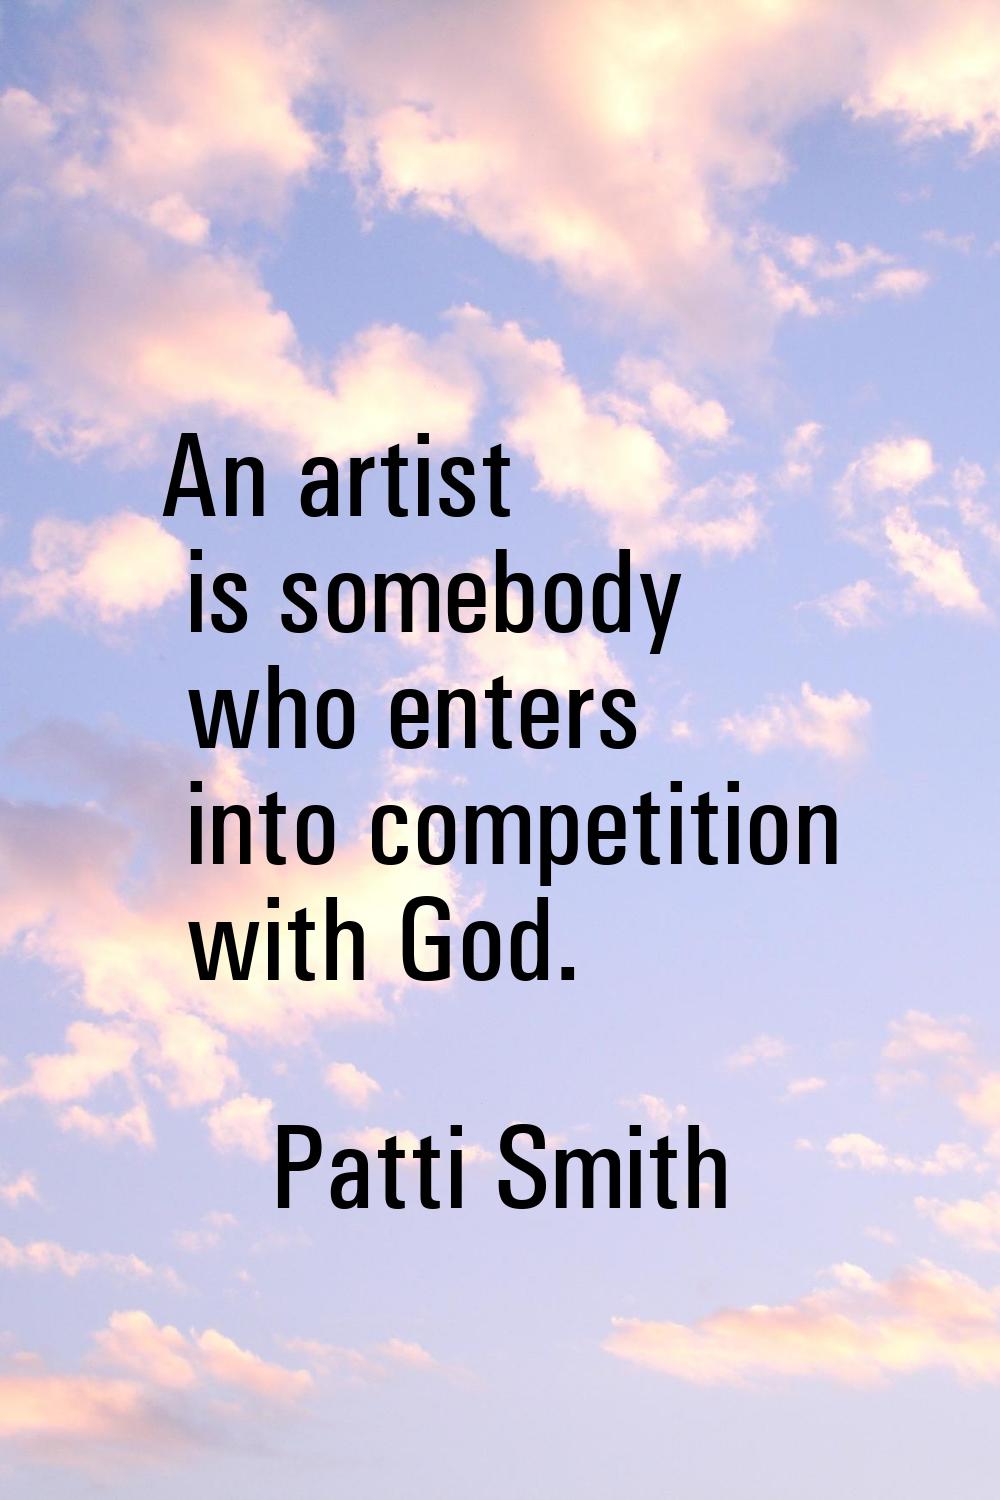 An artist is somebody who enters into competition with God.